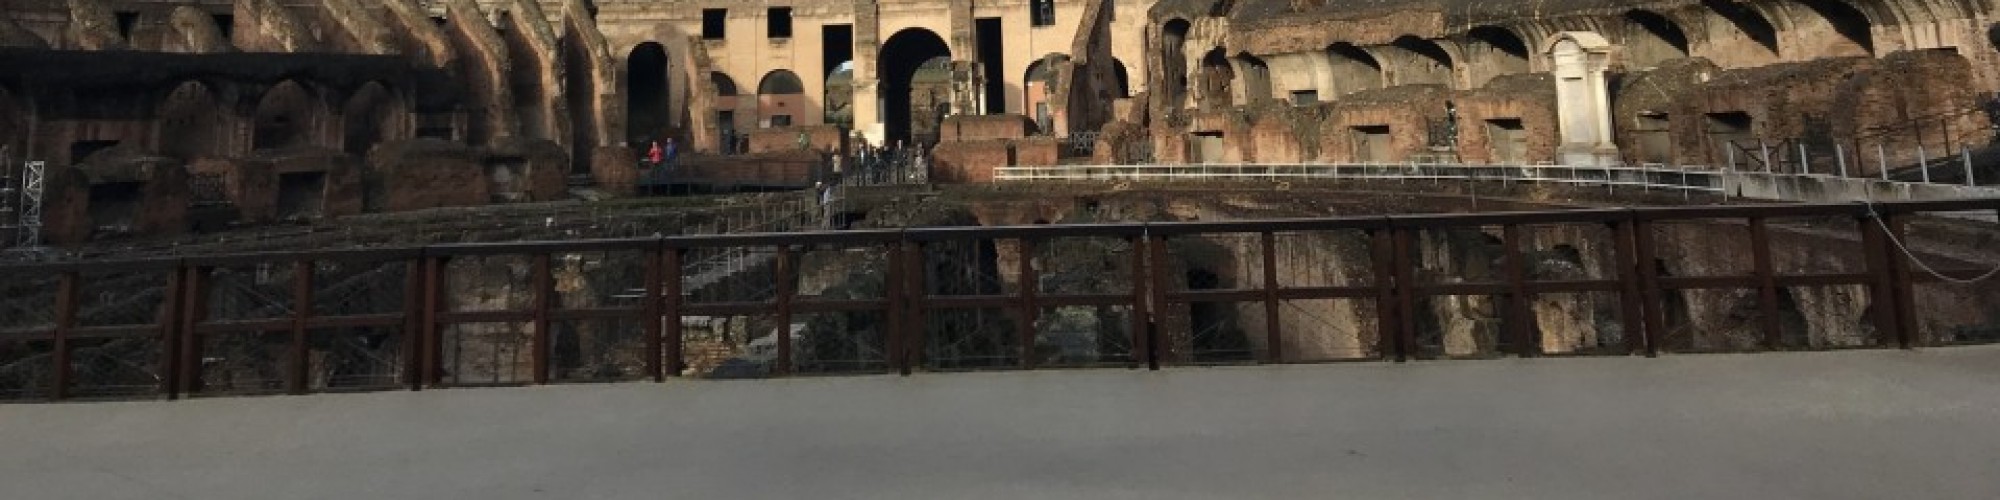 Skip the line Colosseum tour with arena floor, Forum and Palatine Hill